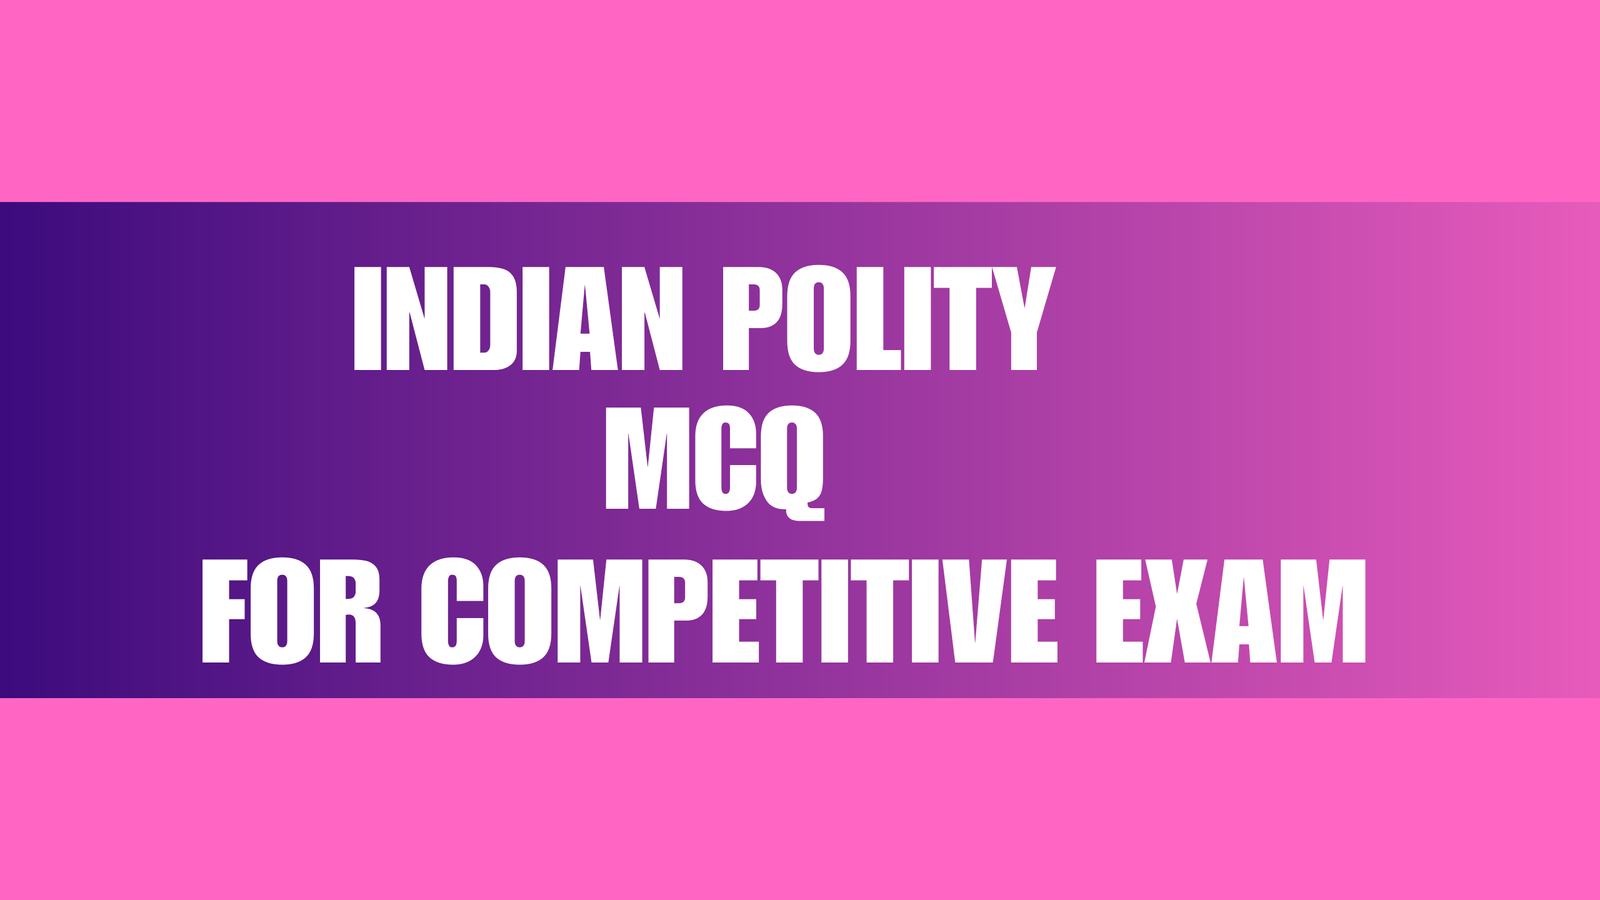 Indian Polity MCQ for Competitive Exam